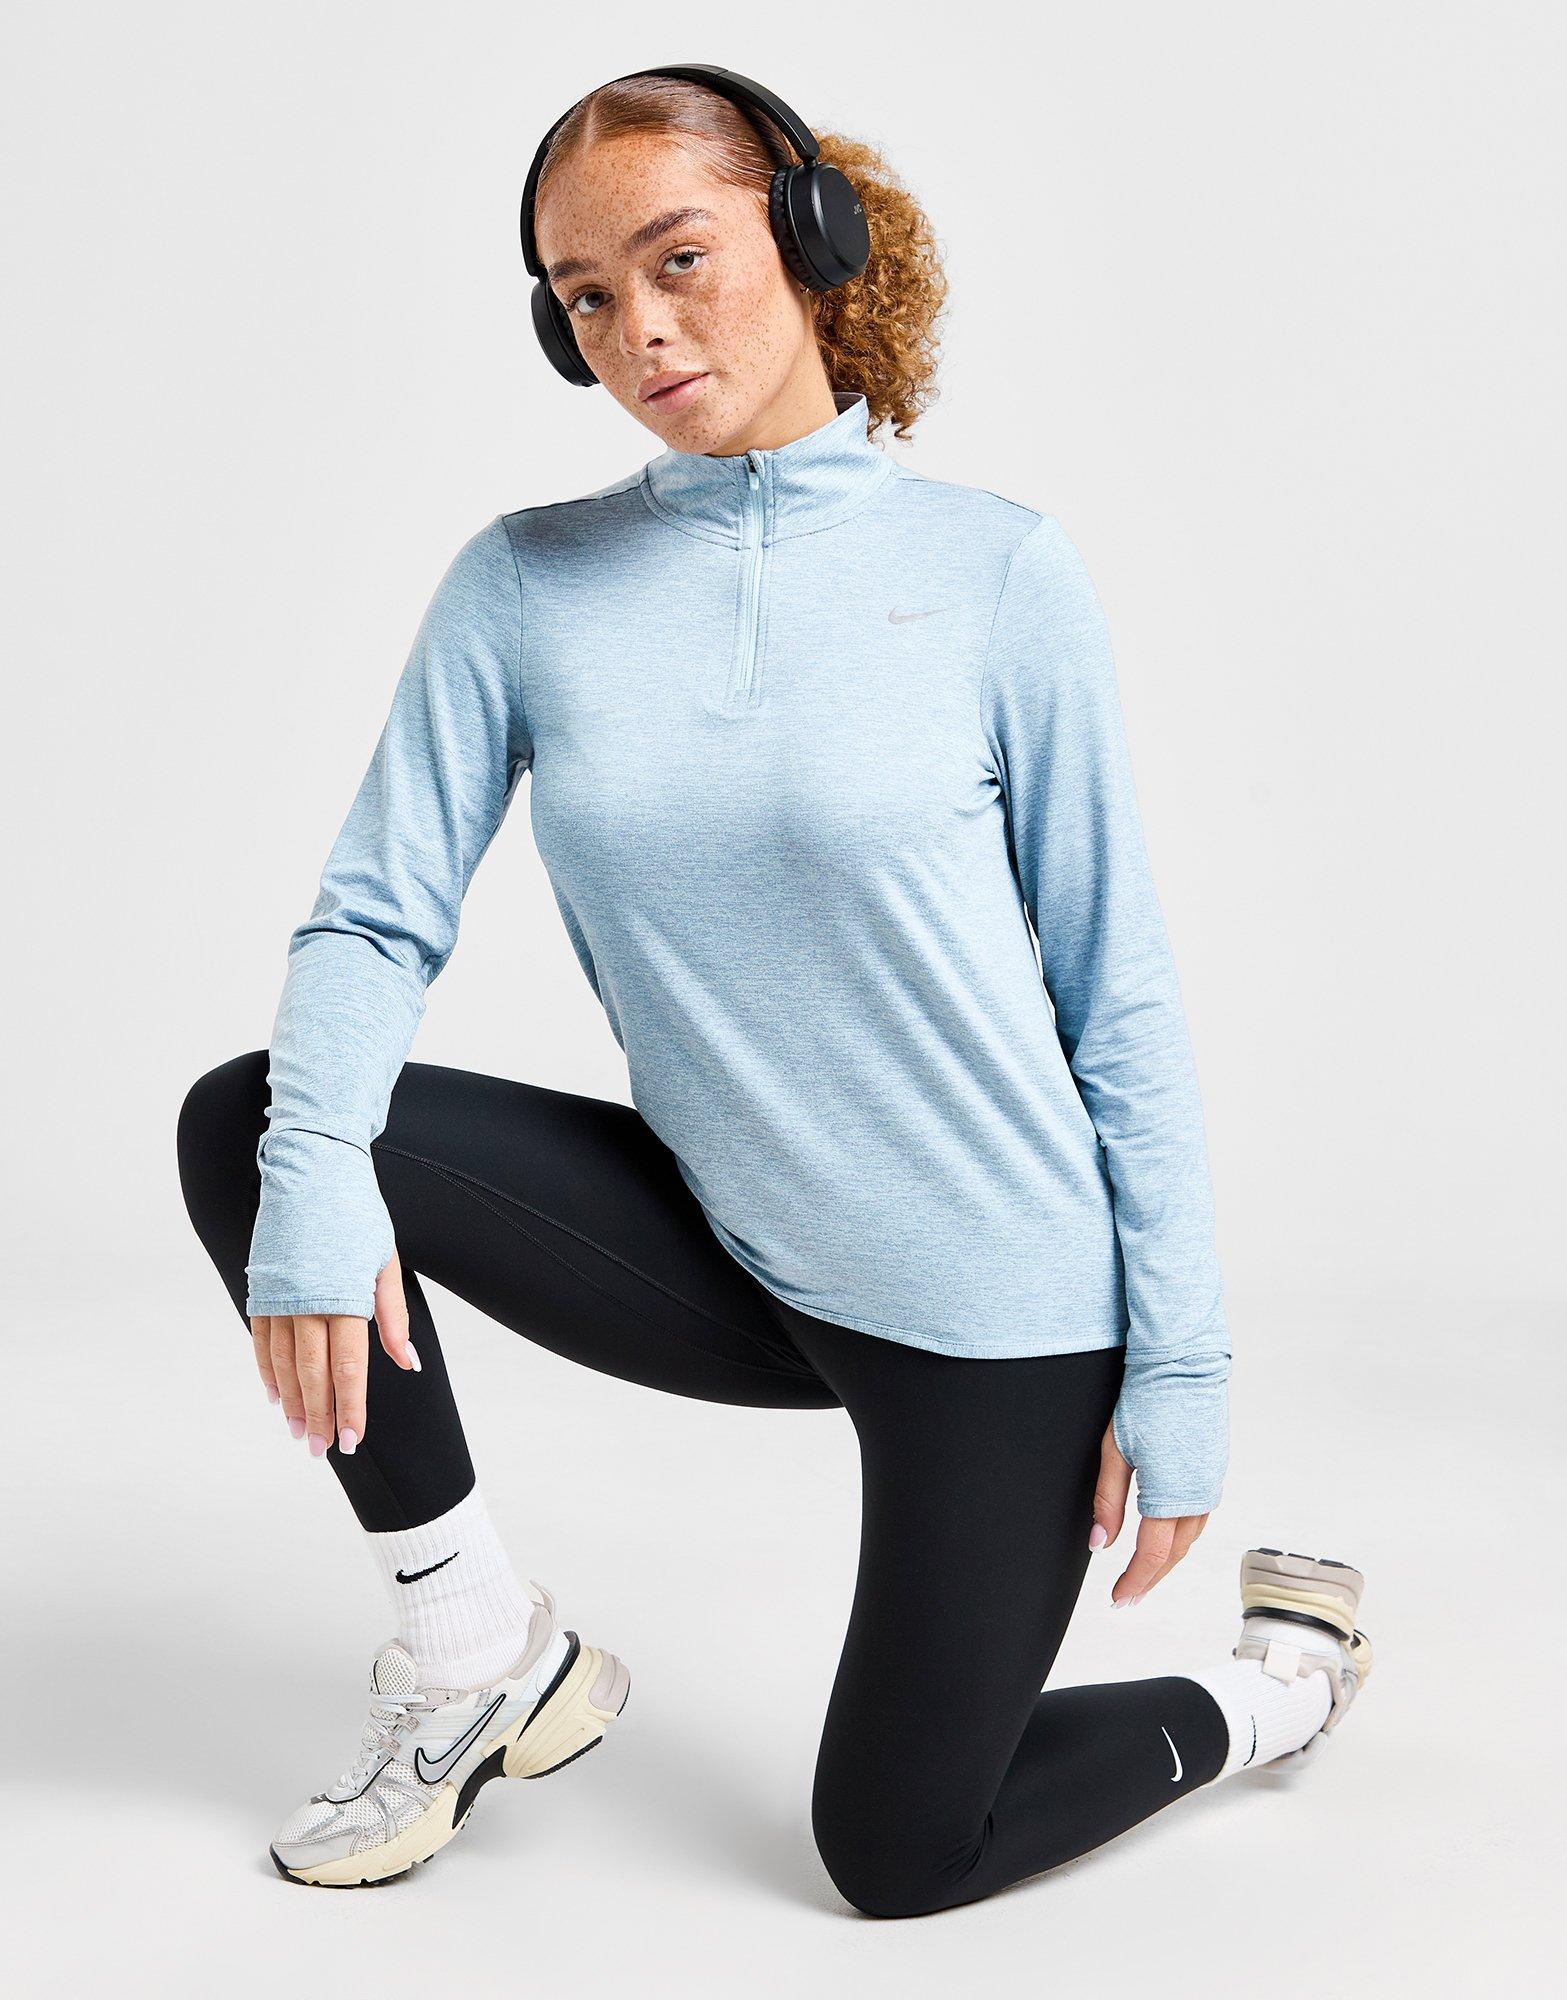 Nike Womens Dry Element 1/2 Zip Running Top (US, Alpha, X-Large